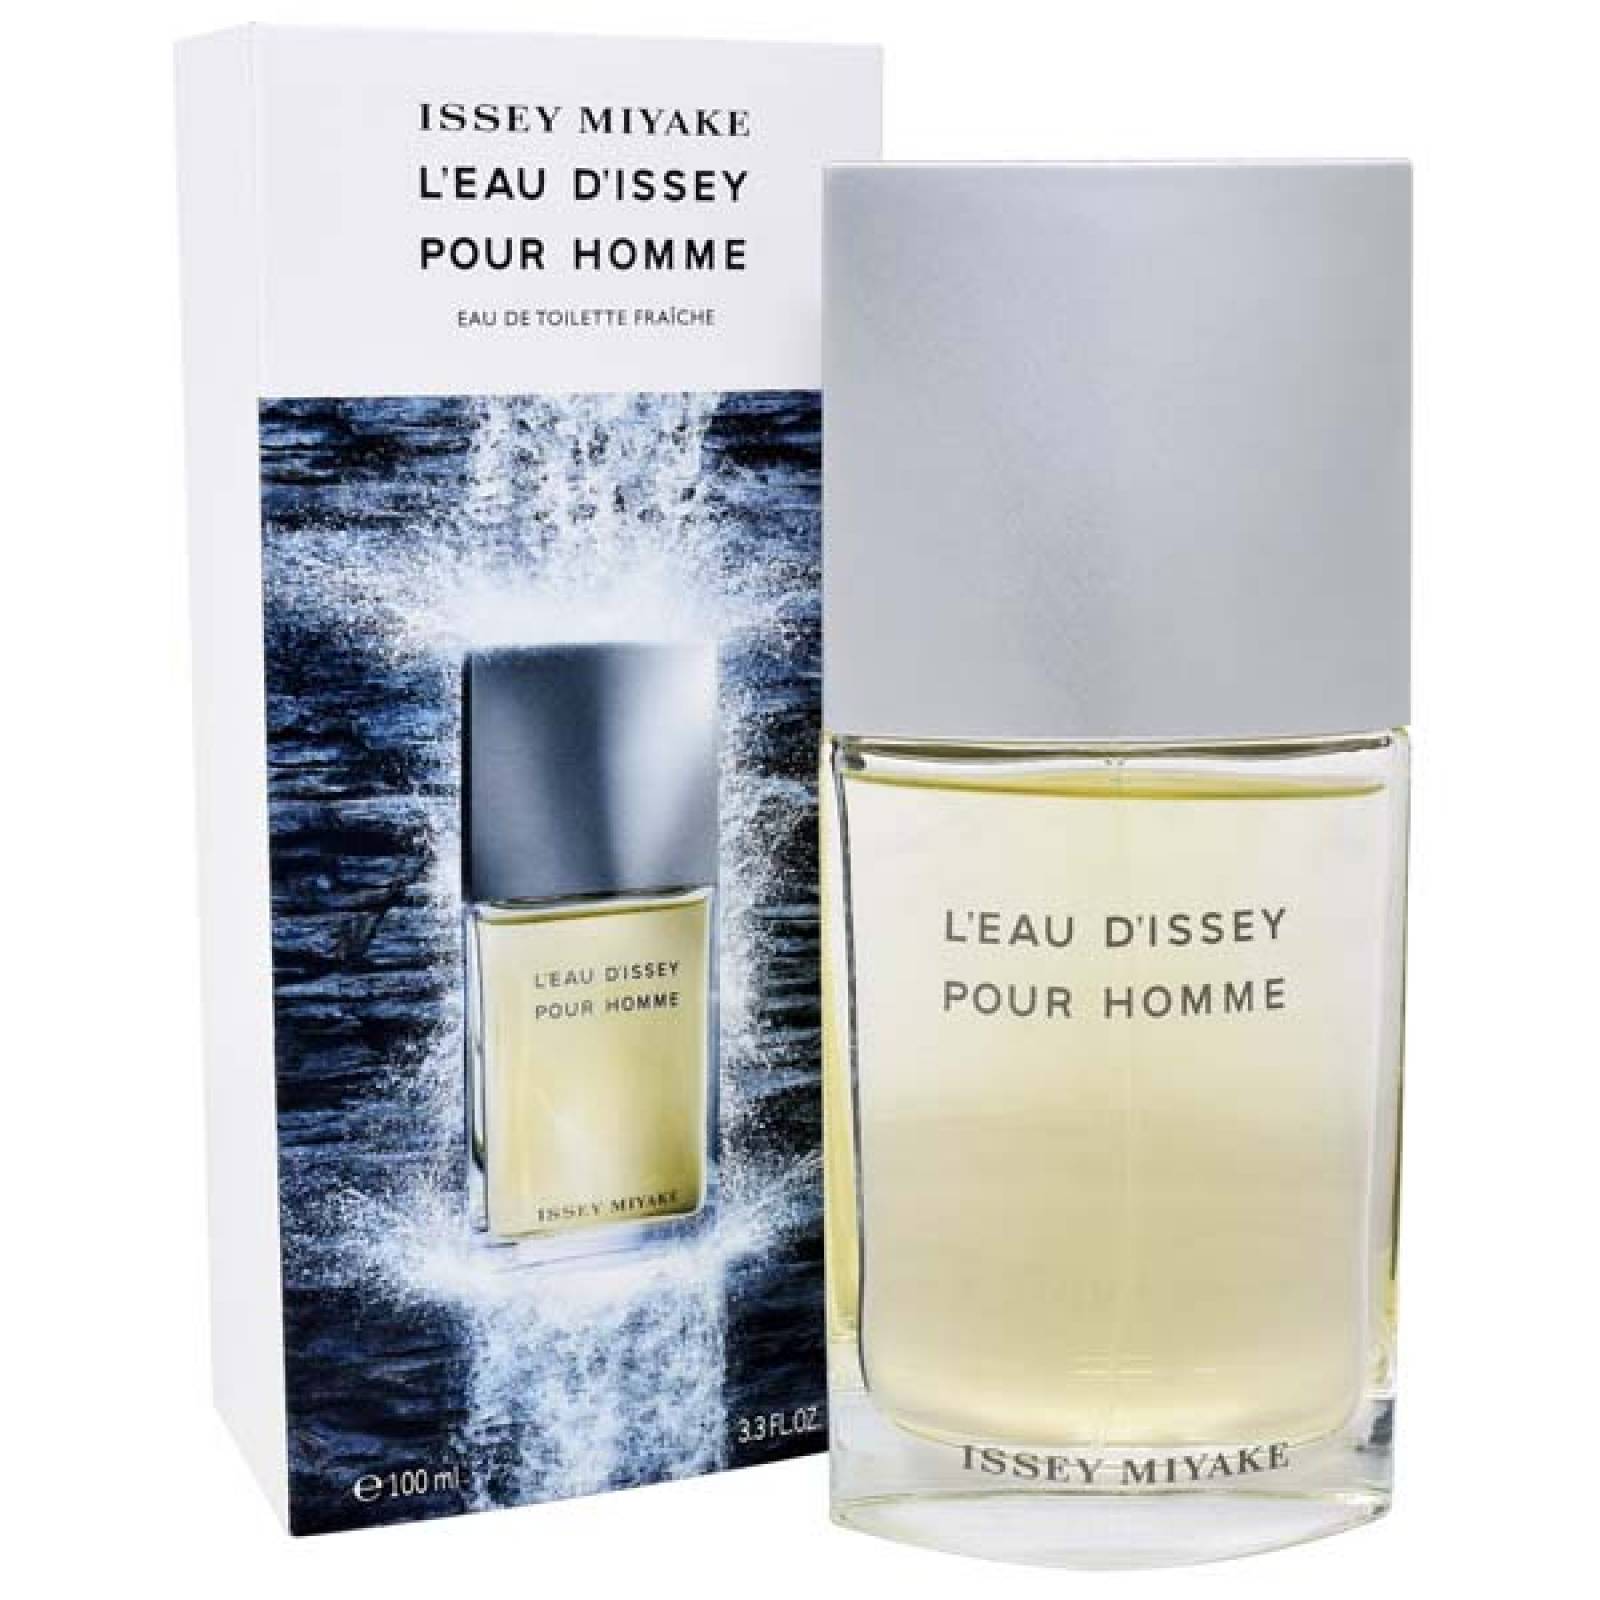 ISSEY MIYAKE L'EAU D'ISSEY POUR HOMME FRAICHE 100 ML CABALLERO